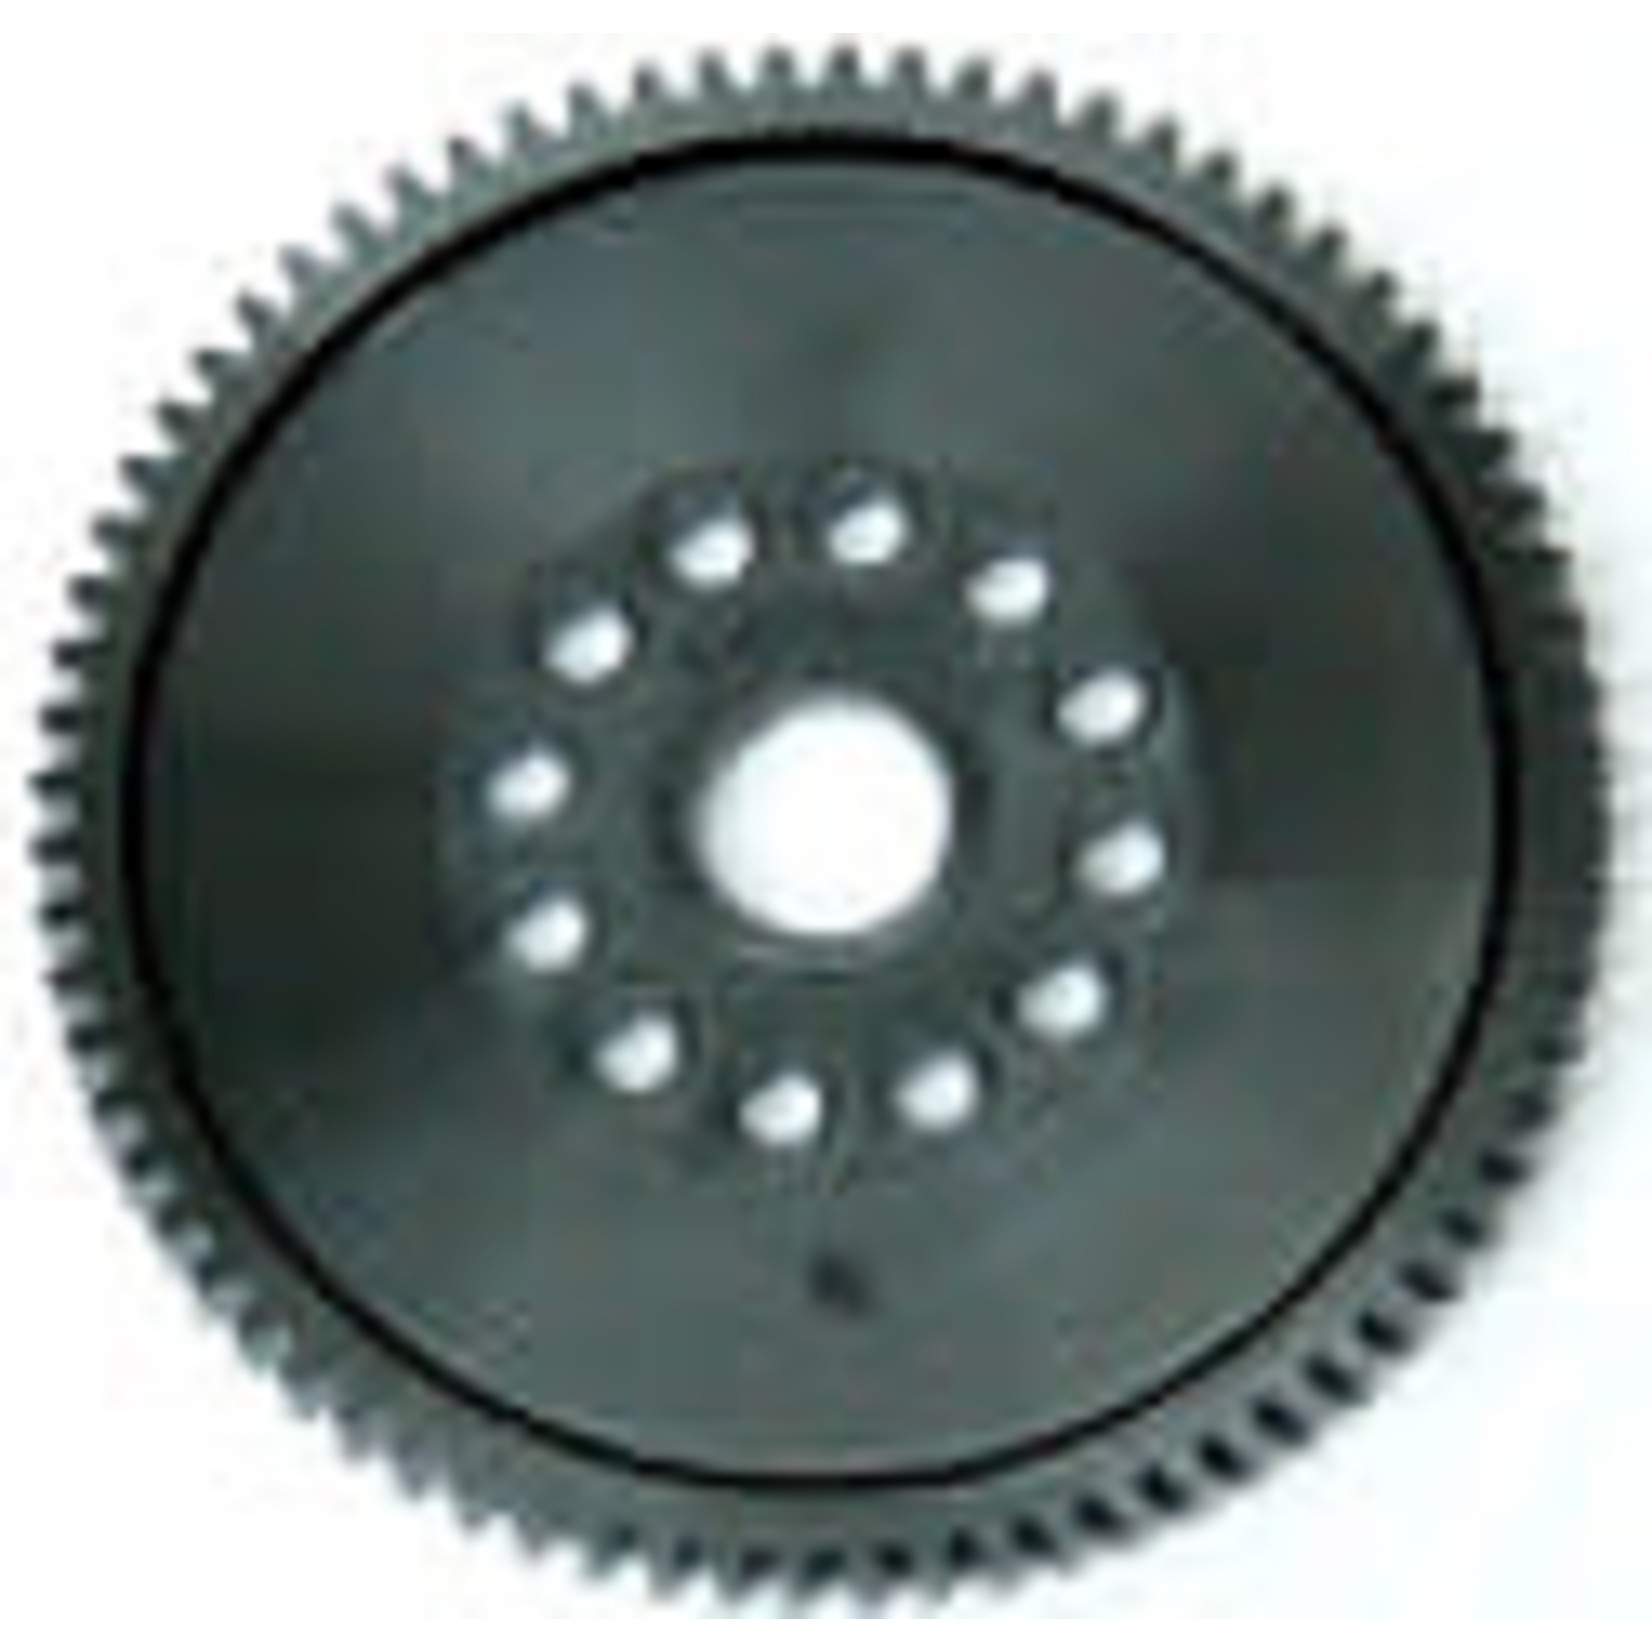 Kimbrough KIM368 68 Tooth 32 Pitch Spur Gear for Traxxas X-Maxx